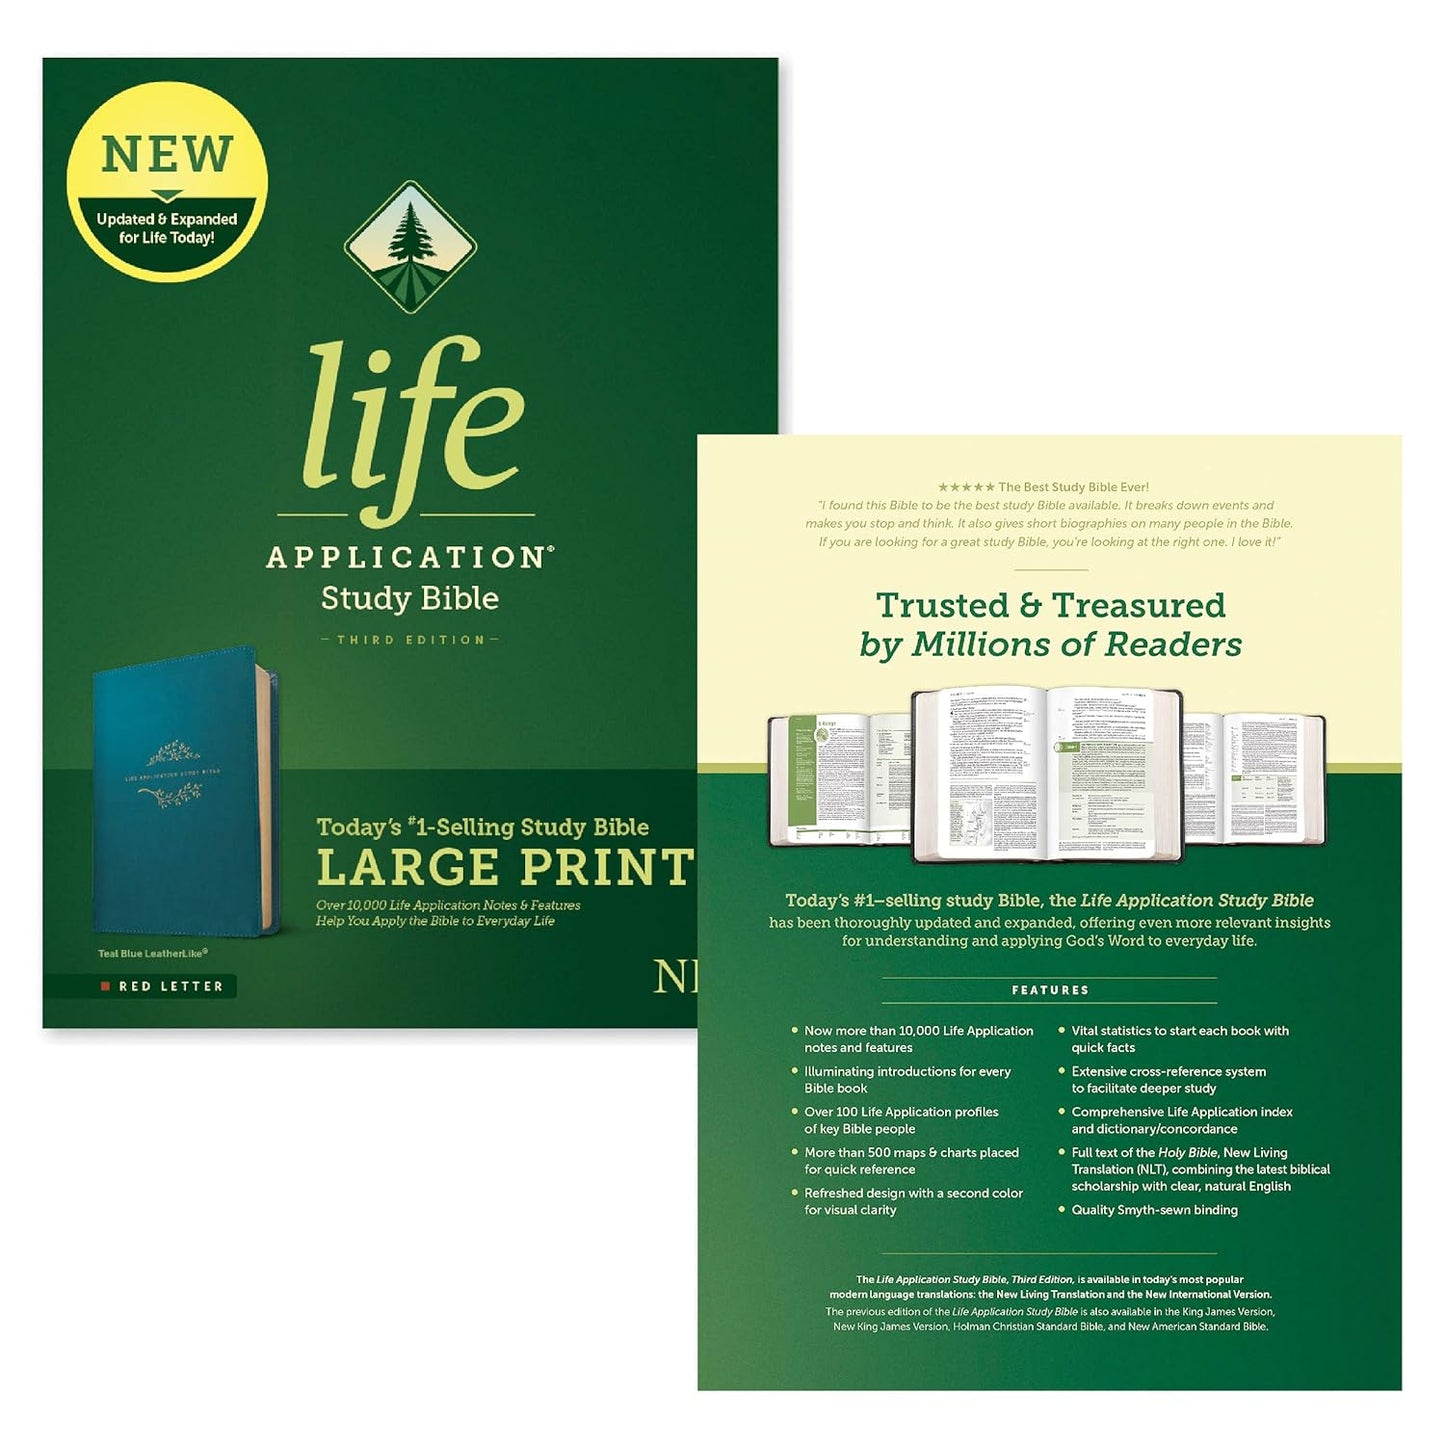 Tyndale NLT Life Application Study Bible, Third Edition, Large Print (LeatherLike, Teal Blue, Red Letter) – New Living Translation Bible, Large Print Study Bible for Enhanced Readability